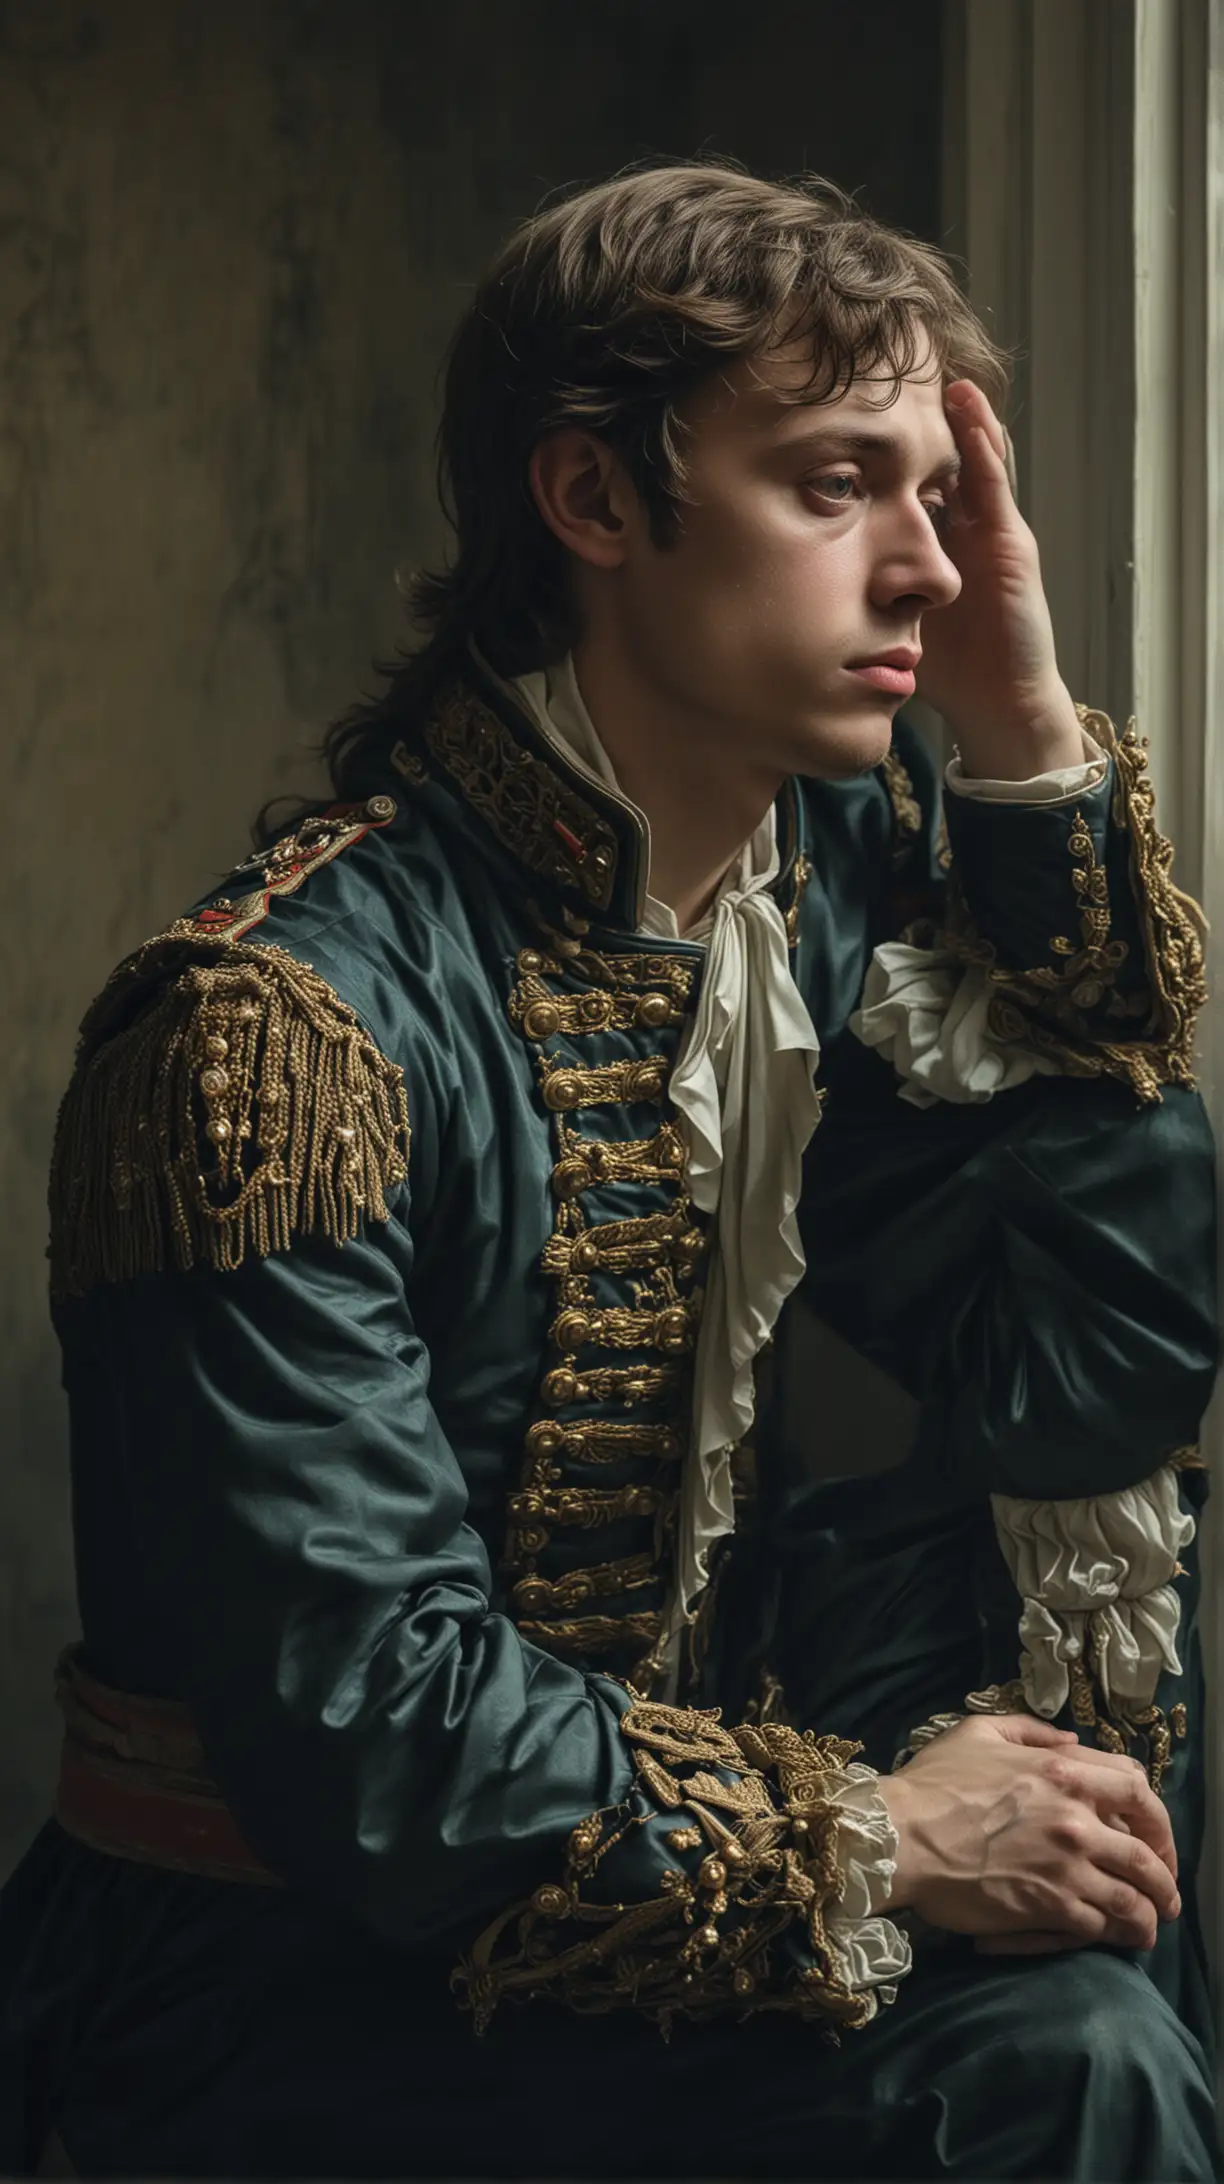 Depict Alexei, the neglected son of Peter the Great, looking despondent and isolated, reflecting his feelings of abandonment and disillusionment.